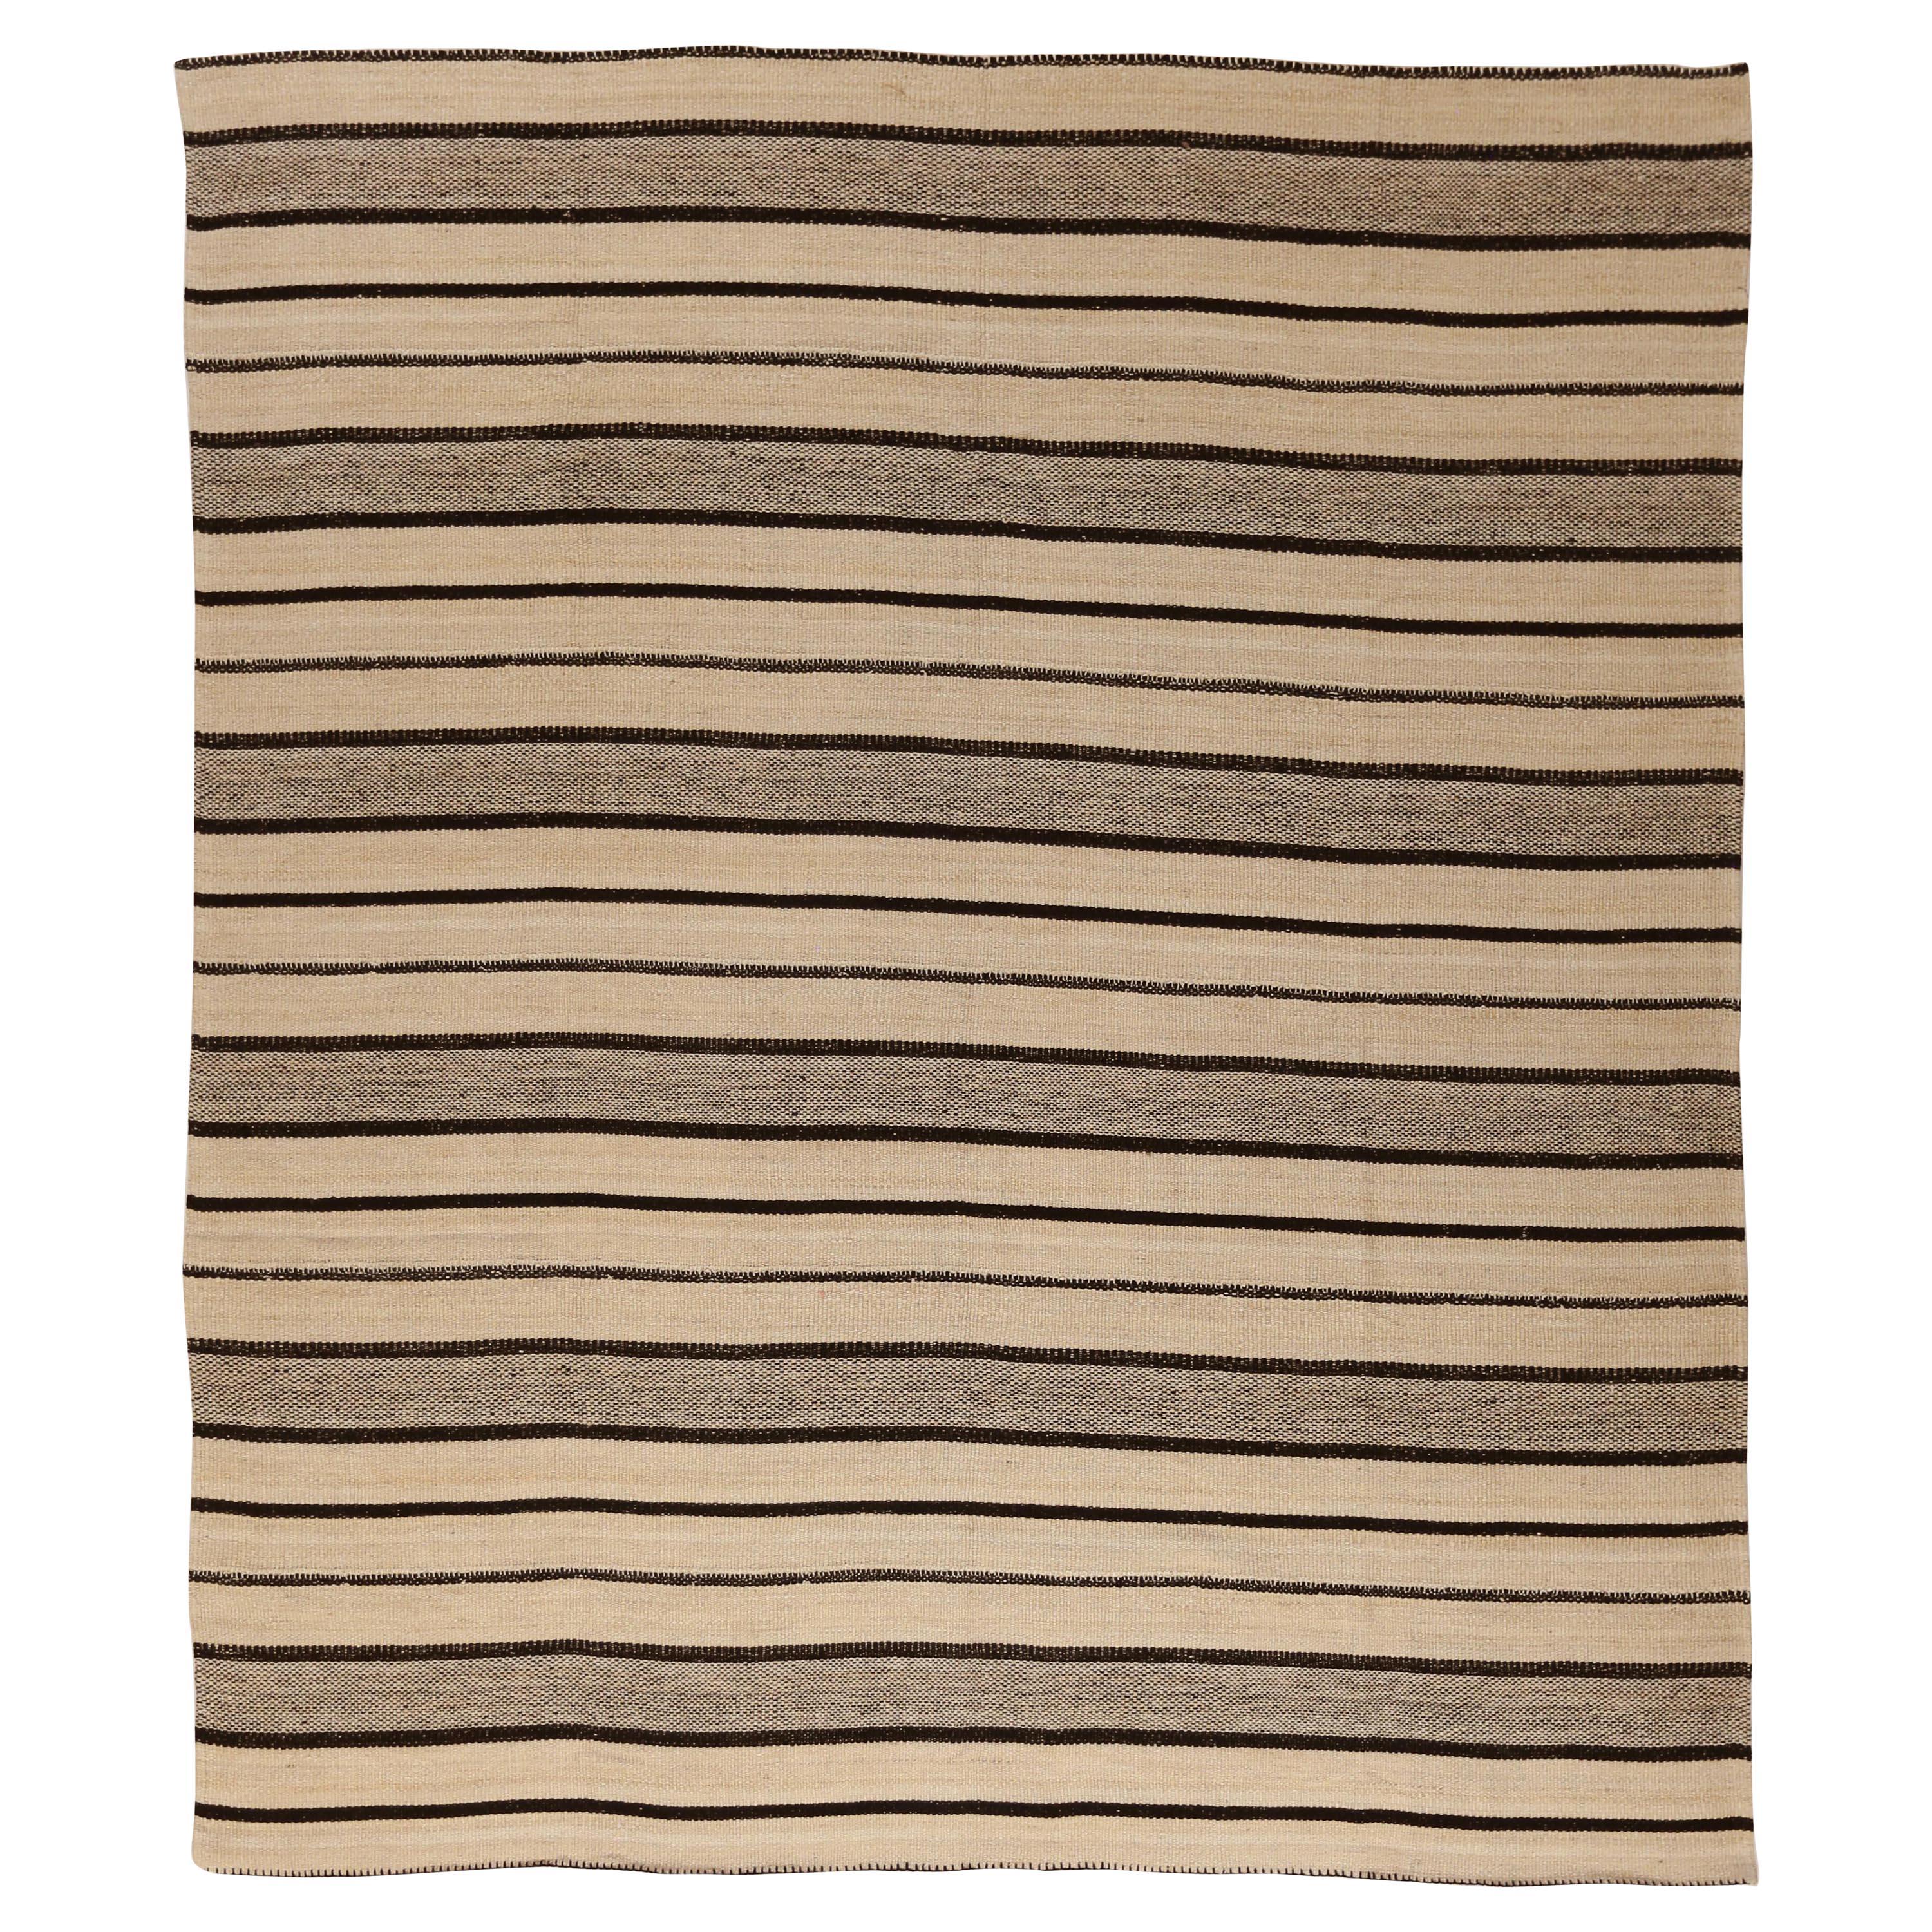 Contemporary Kilim Persian Rug in Beige with Black and Brown Stripes For Sale